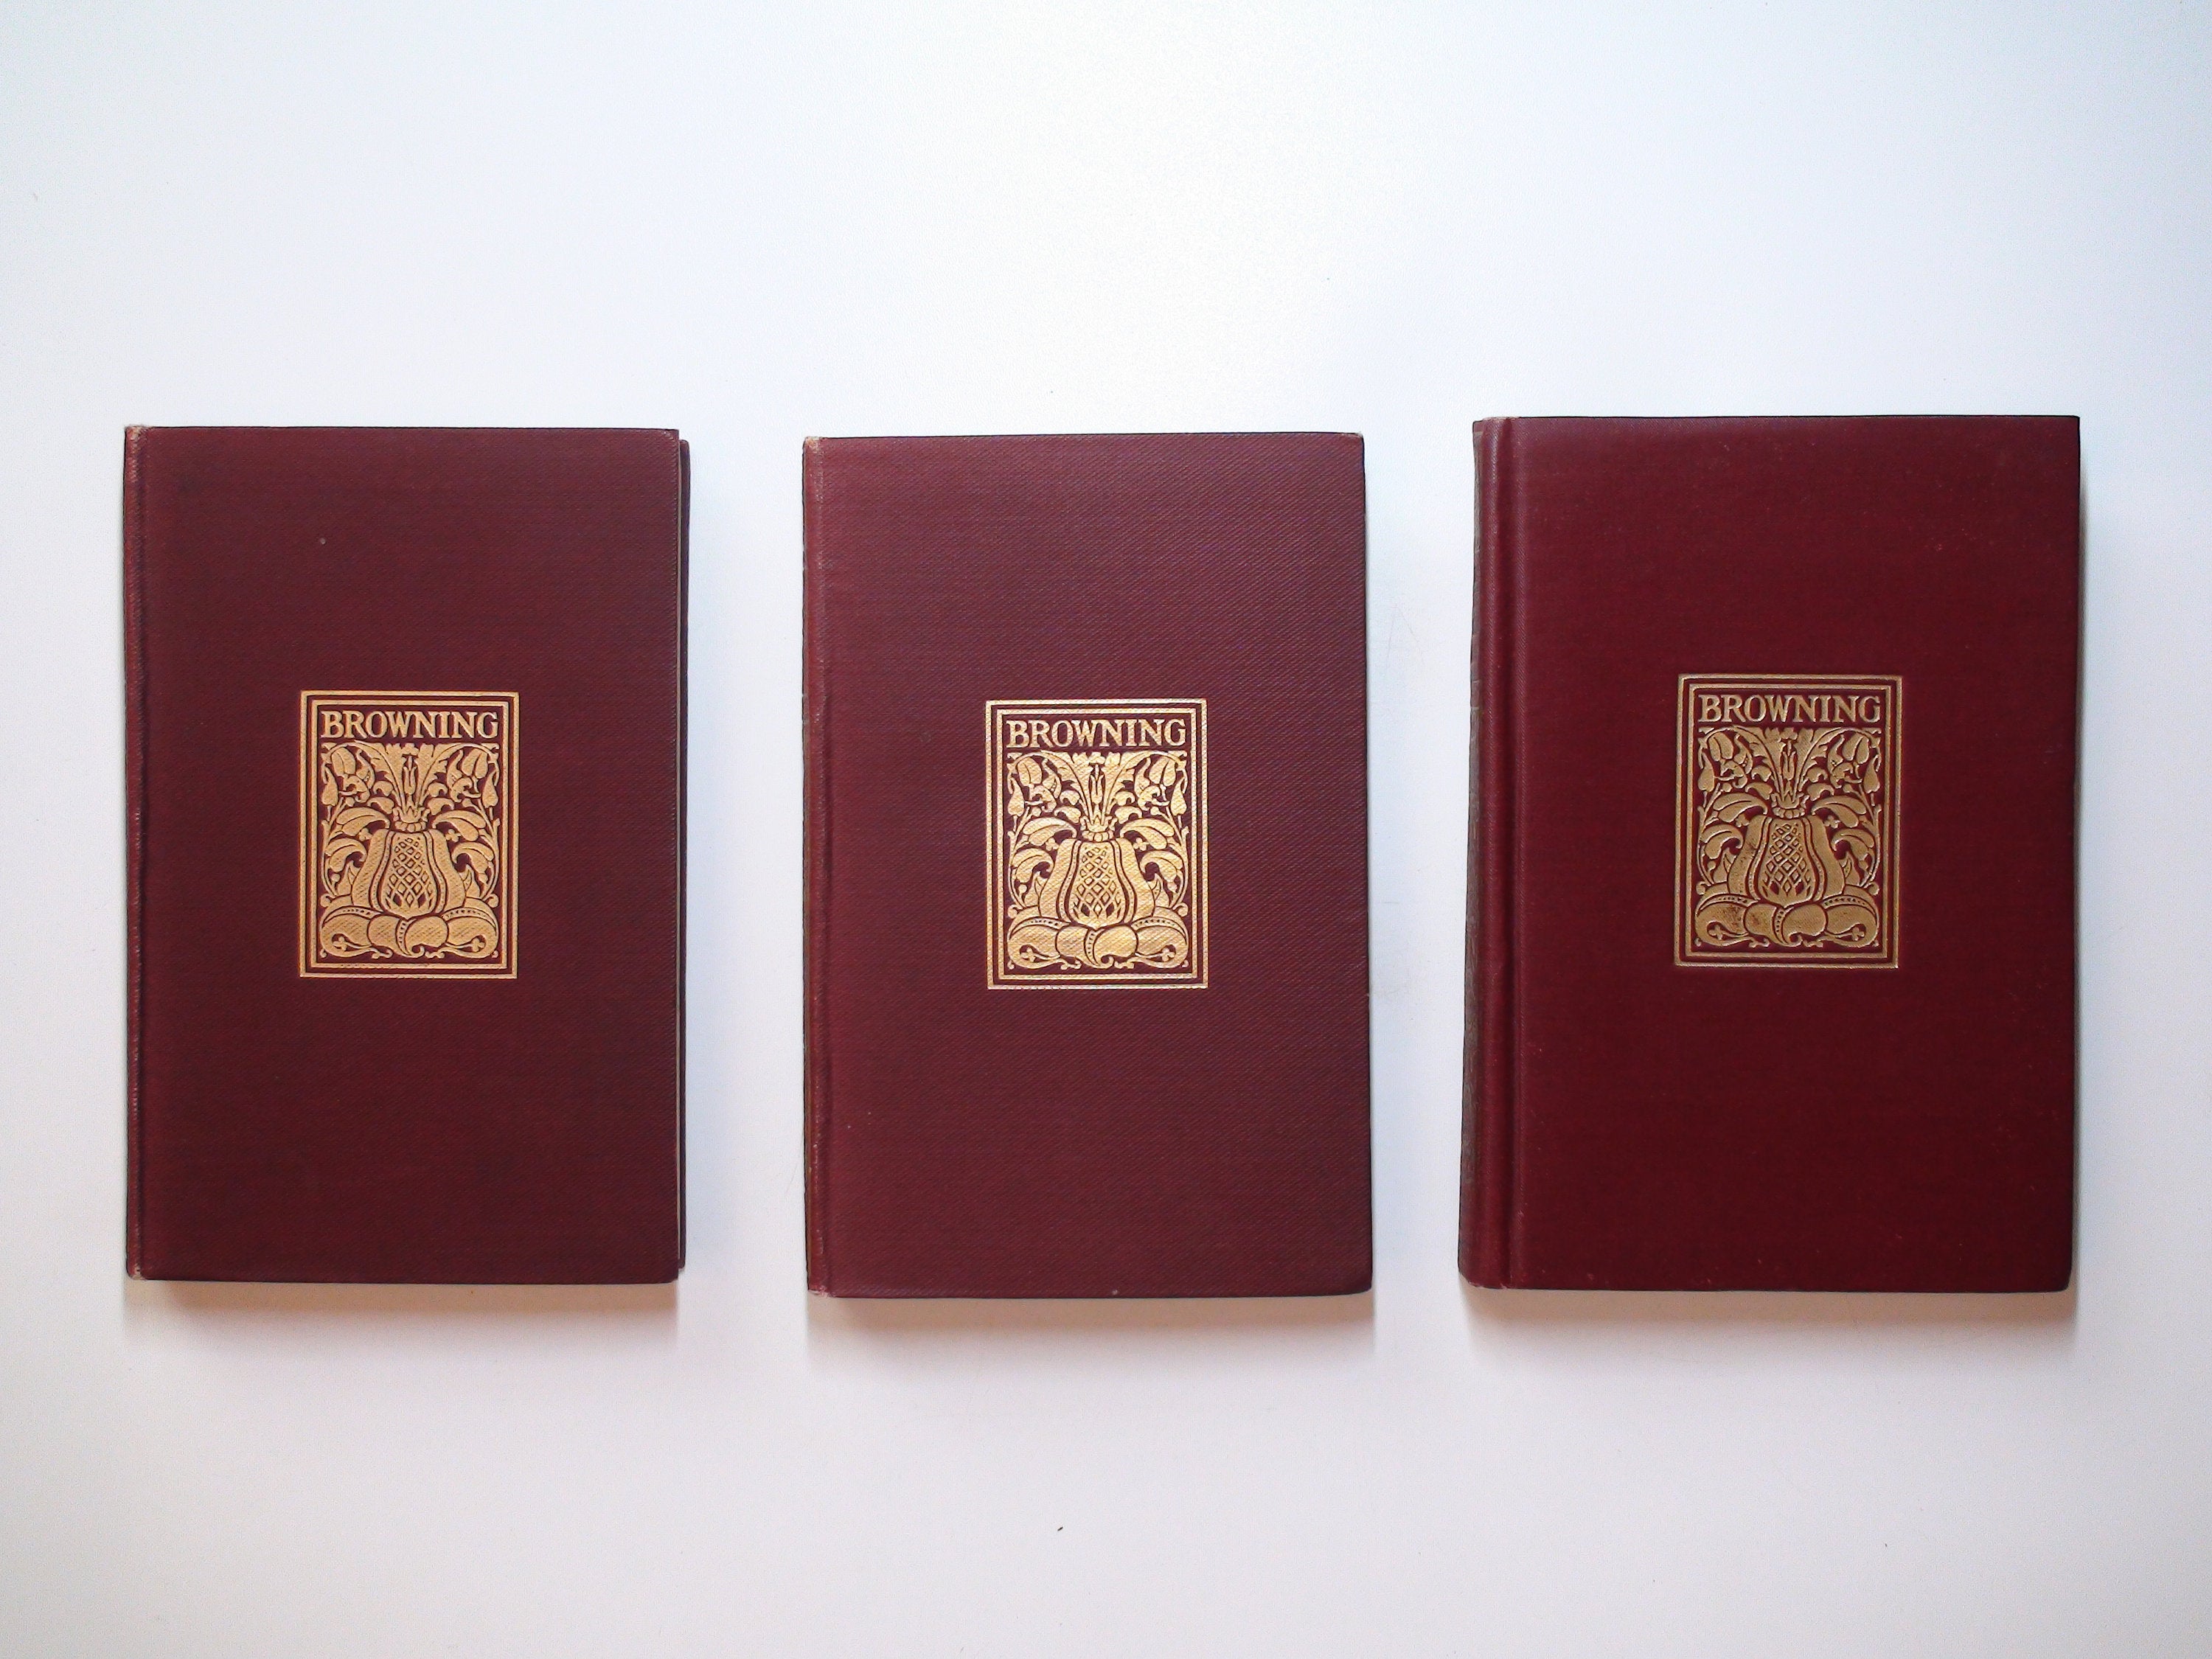 The Complete Works of Robert Browning, Partial Set of 8 Attractive Volumes, 1898